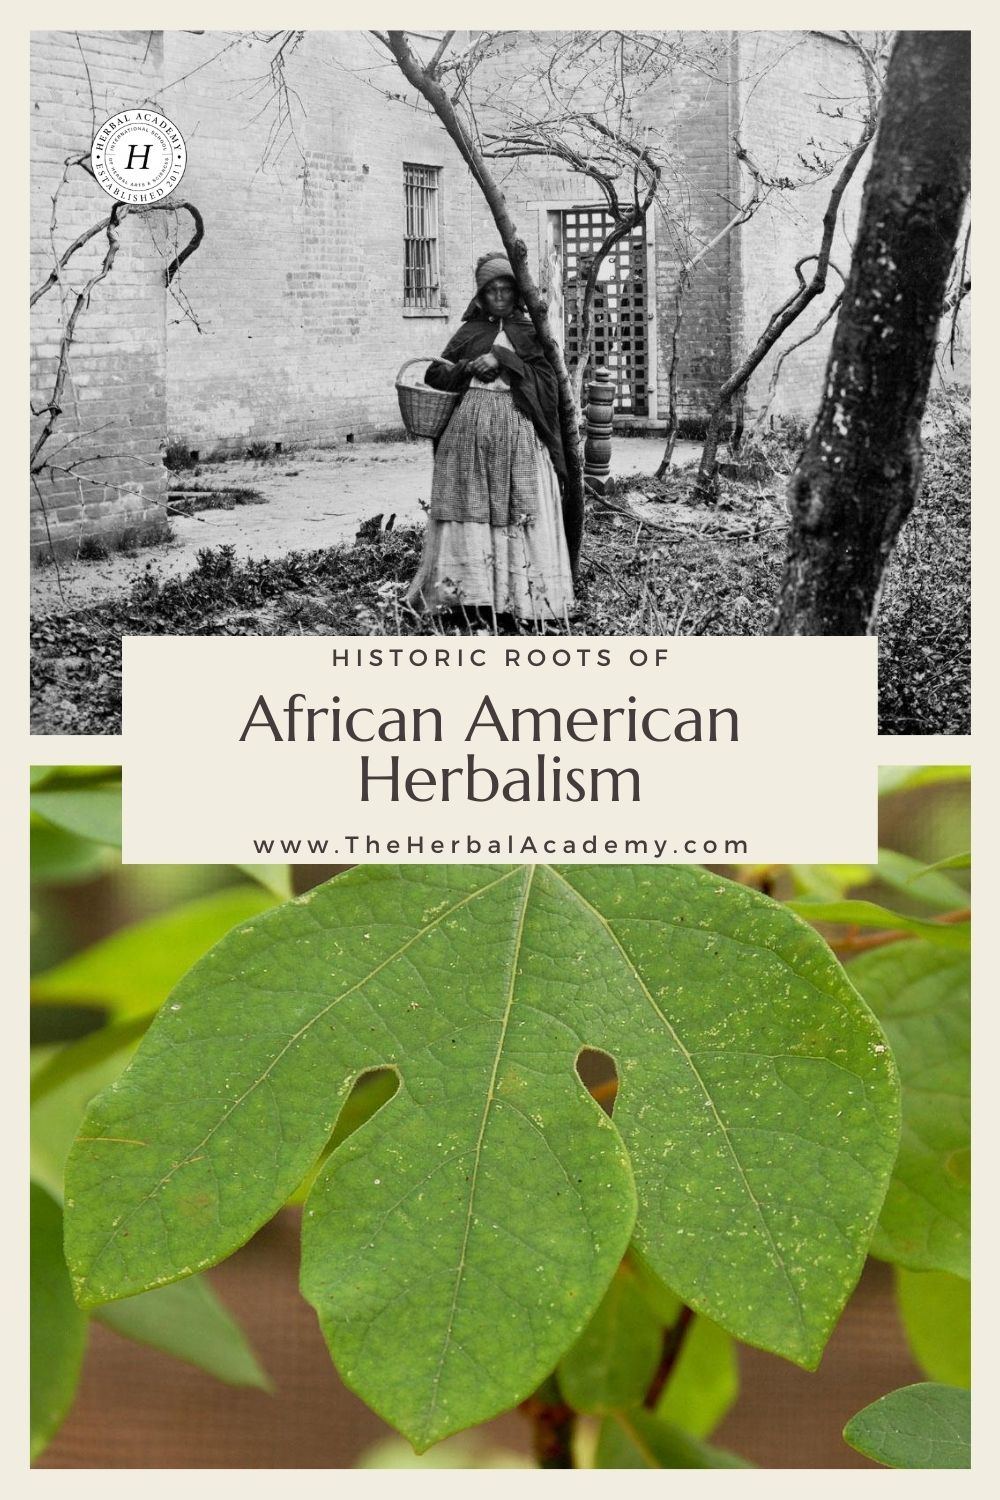 Roots of African American Herbalism: Herbal Use by Enslaved Africans in America | Herbal Academy | African American herbalism is a rich melange of many cultural traditions with deep origins rooted in African history dating back to ancient Egypt.